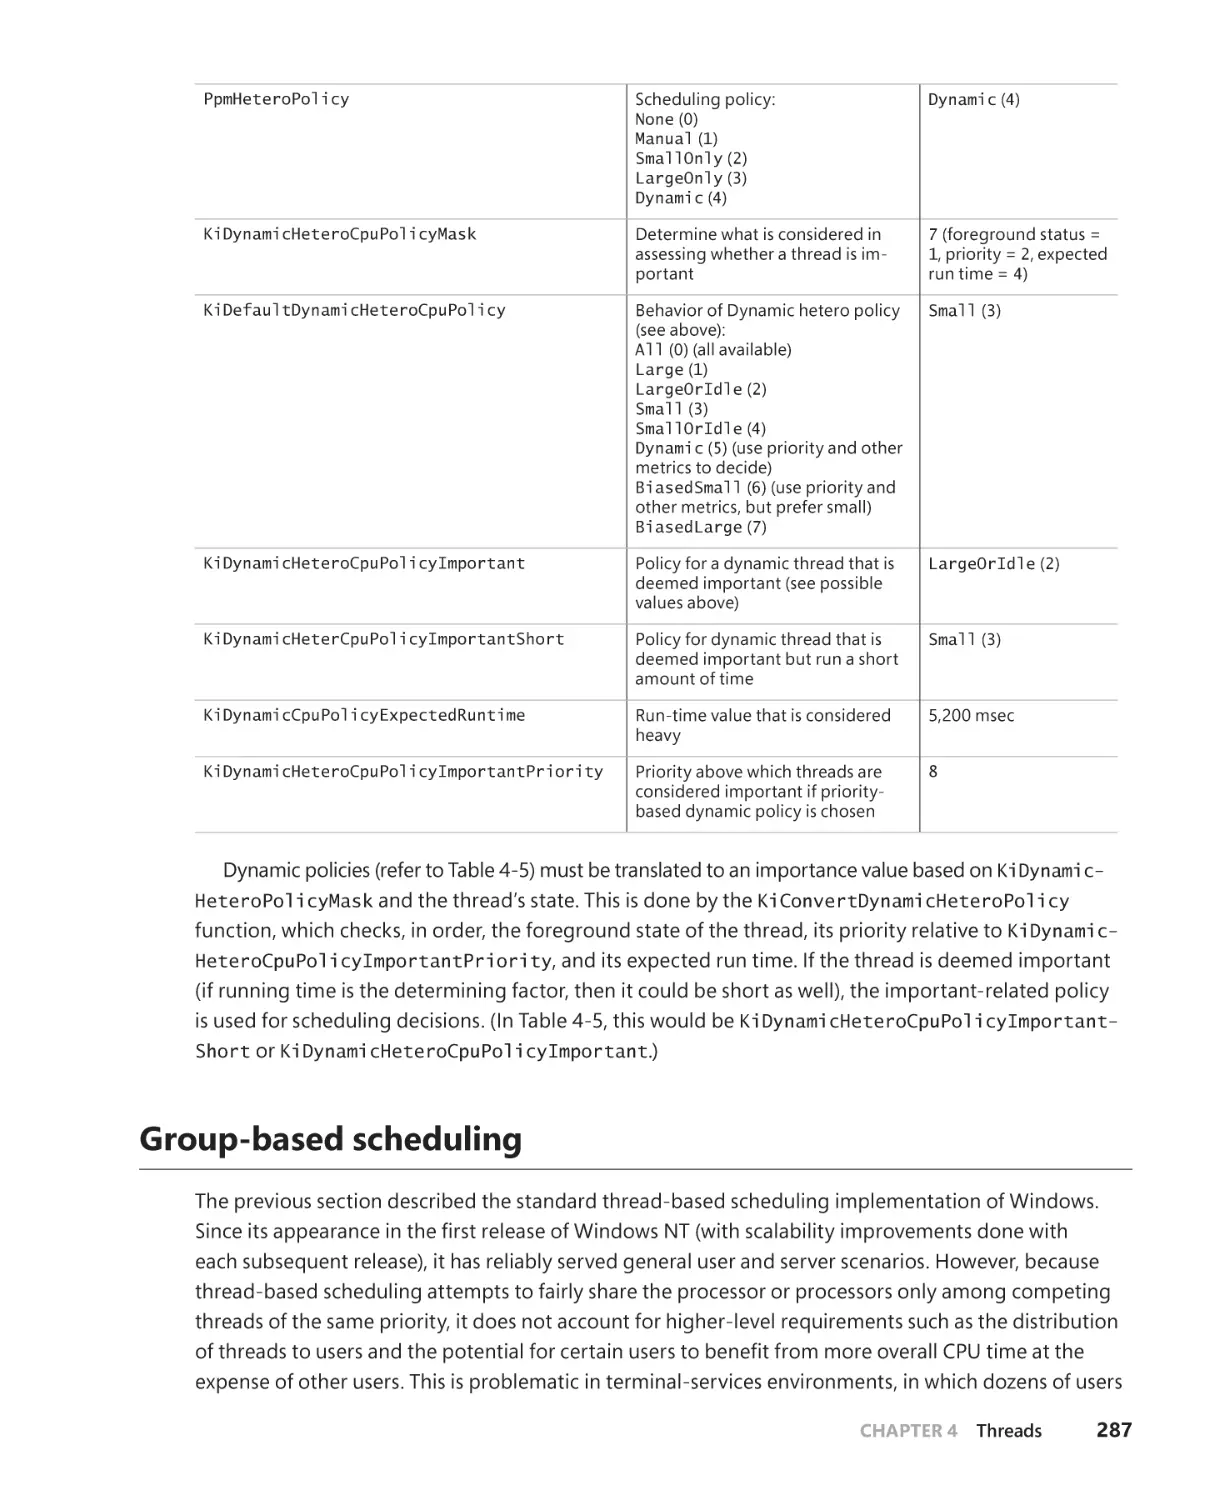 Group-based scheduling